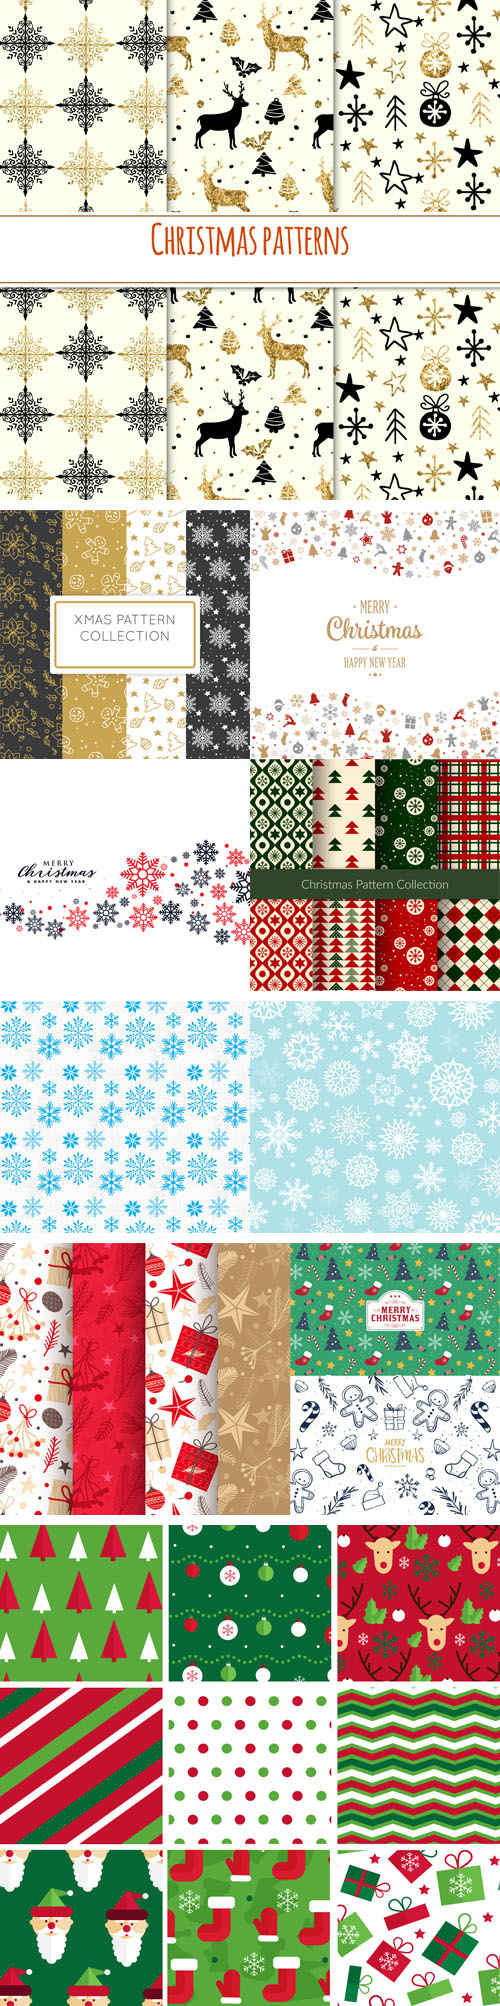 Elegant Christmas Patterns Collection in Vector